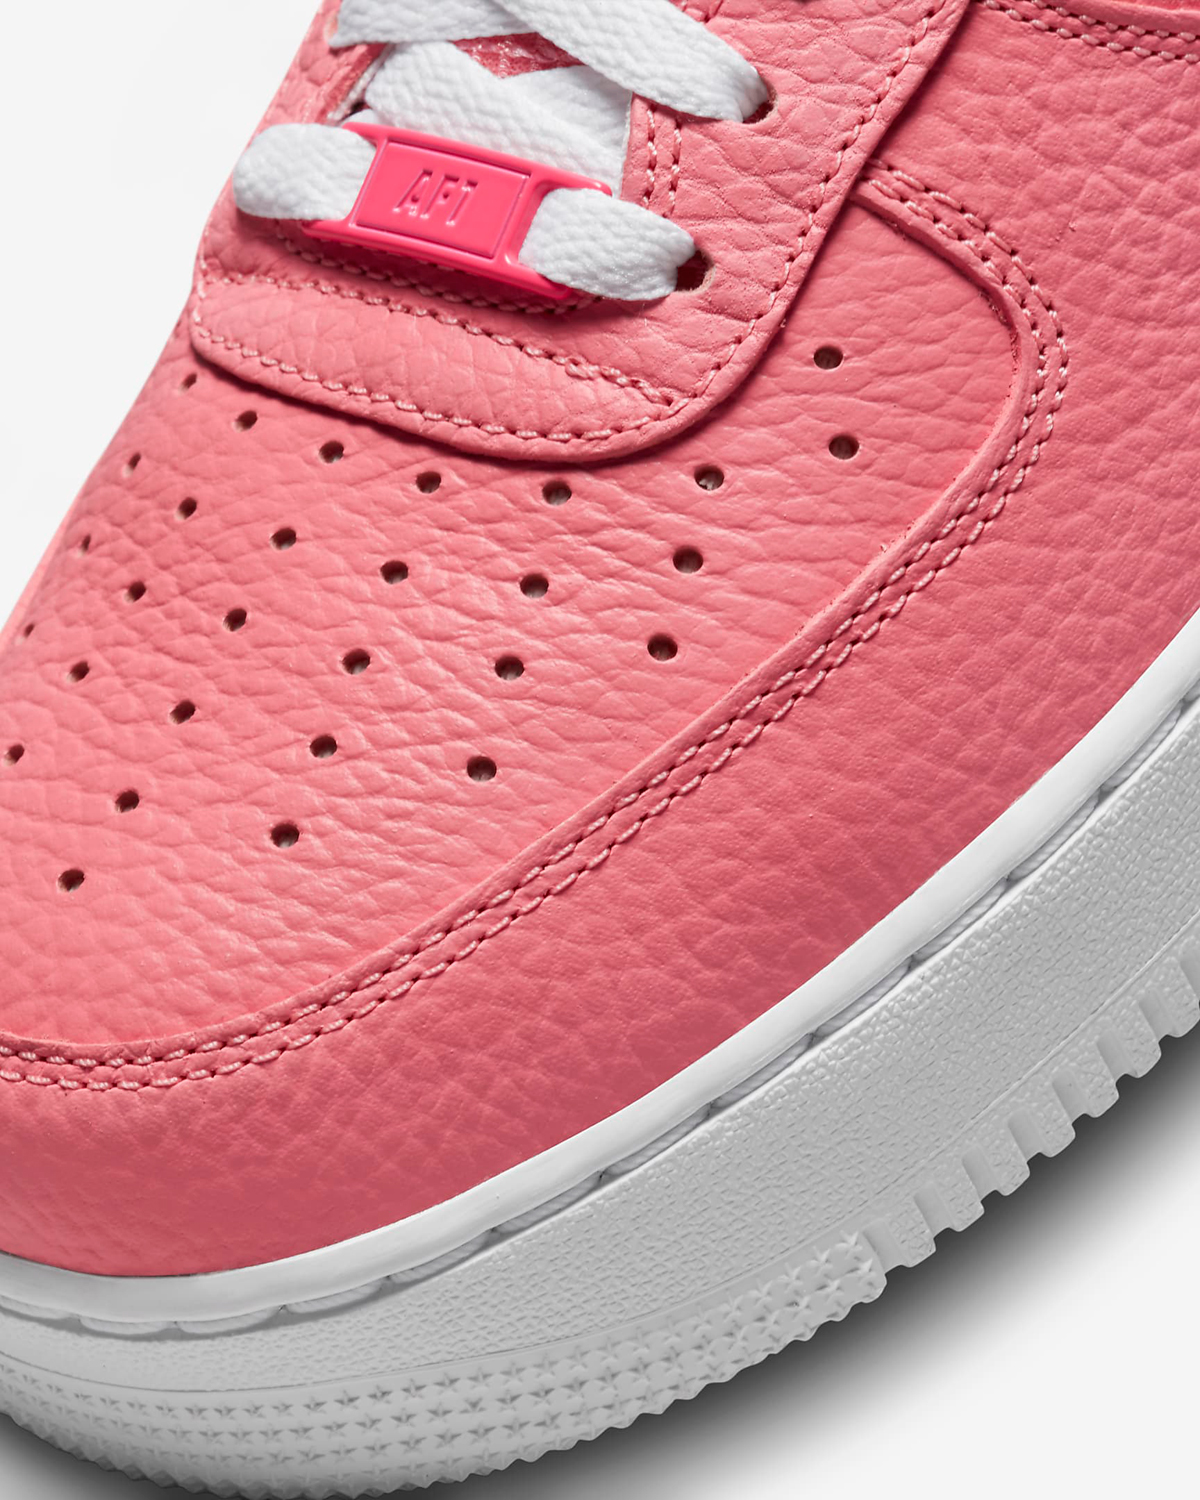 Nike-Air-Force-1-Low-Pink-Gaze-Where-to-Buy-7